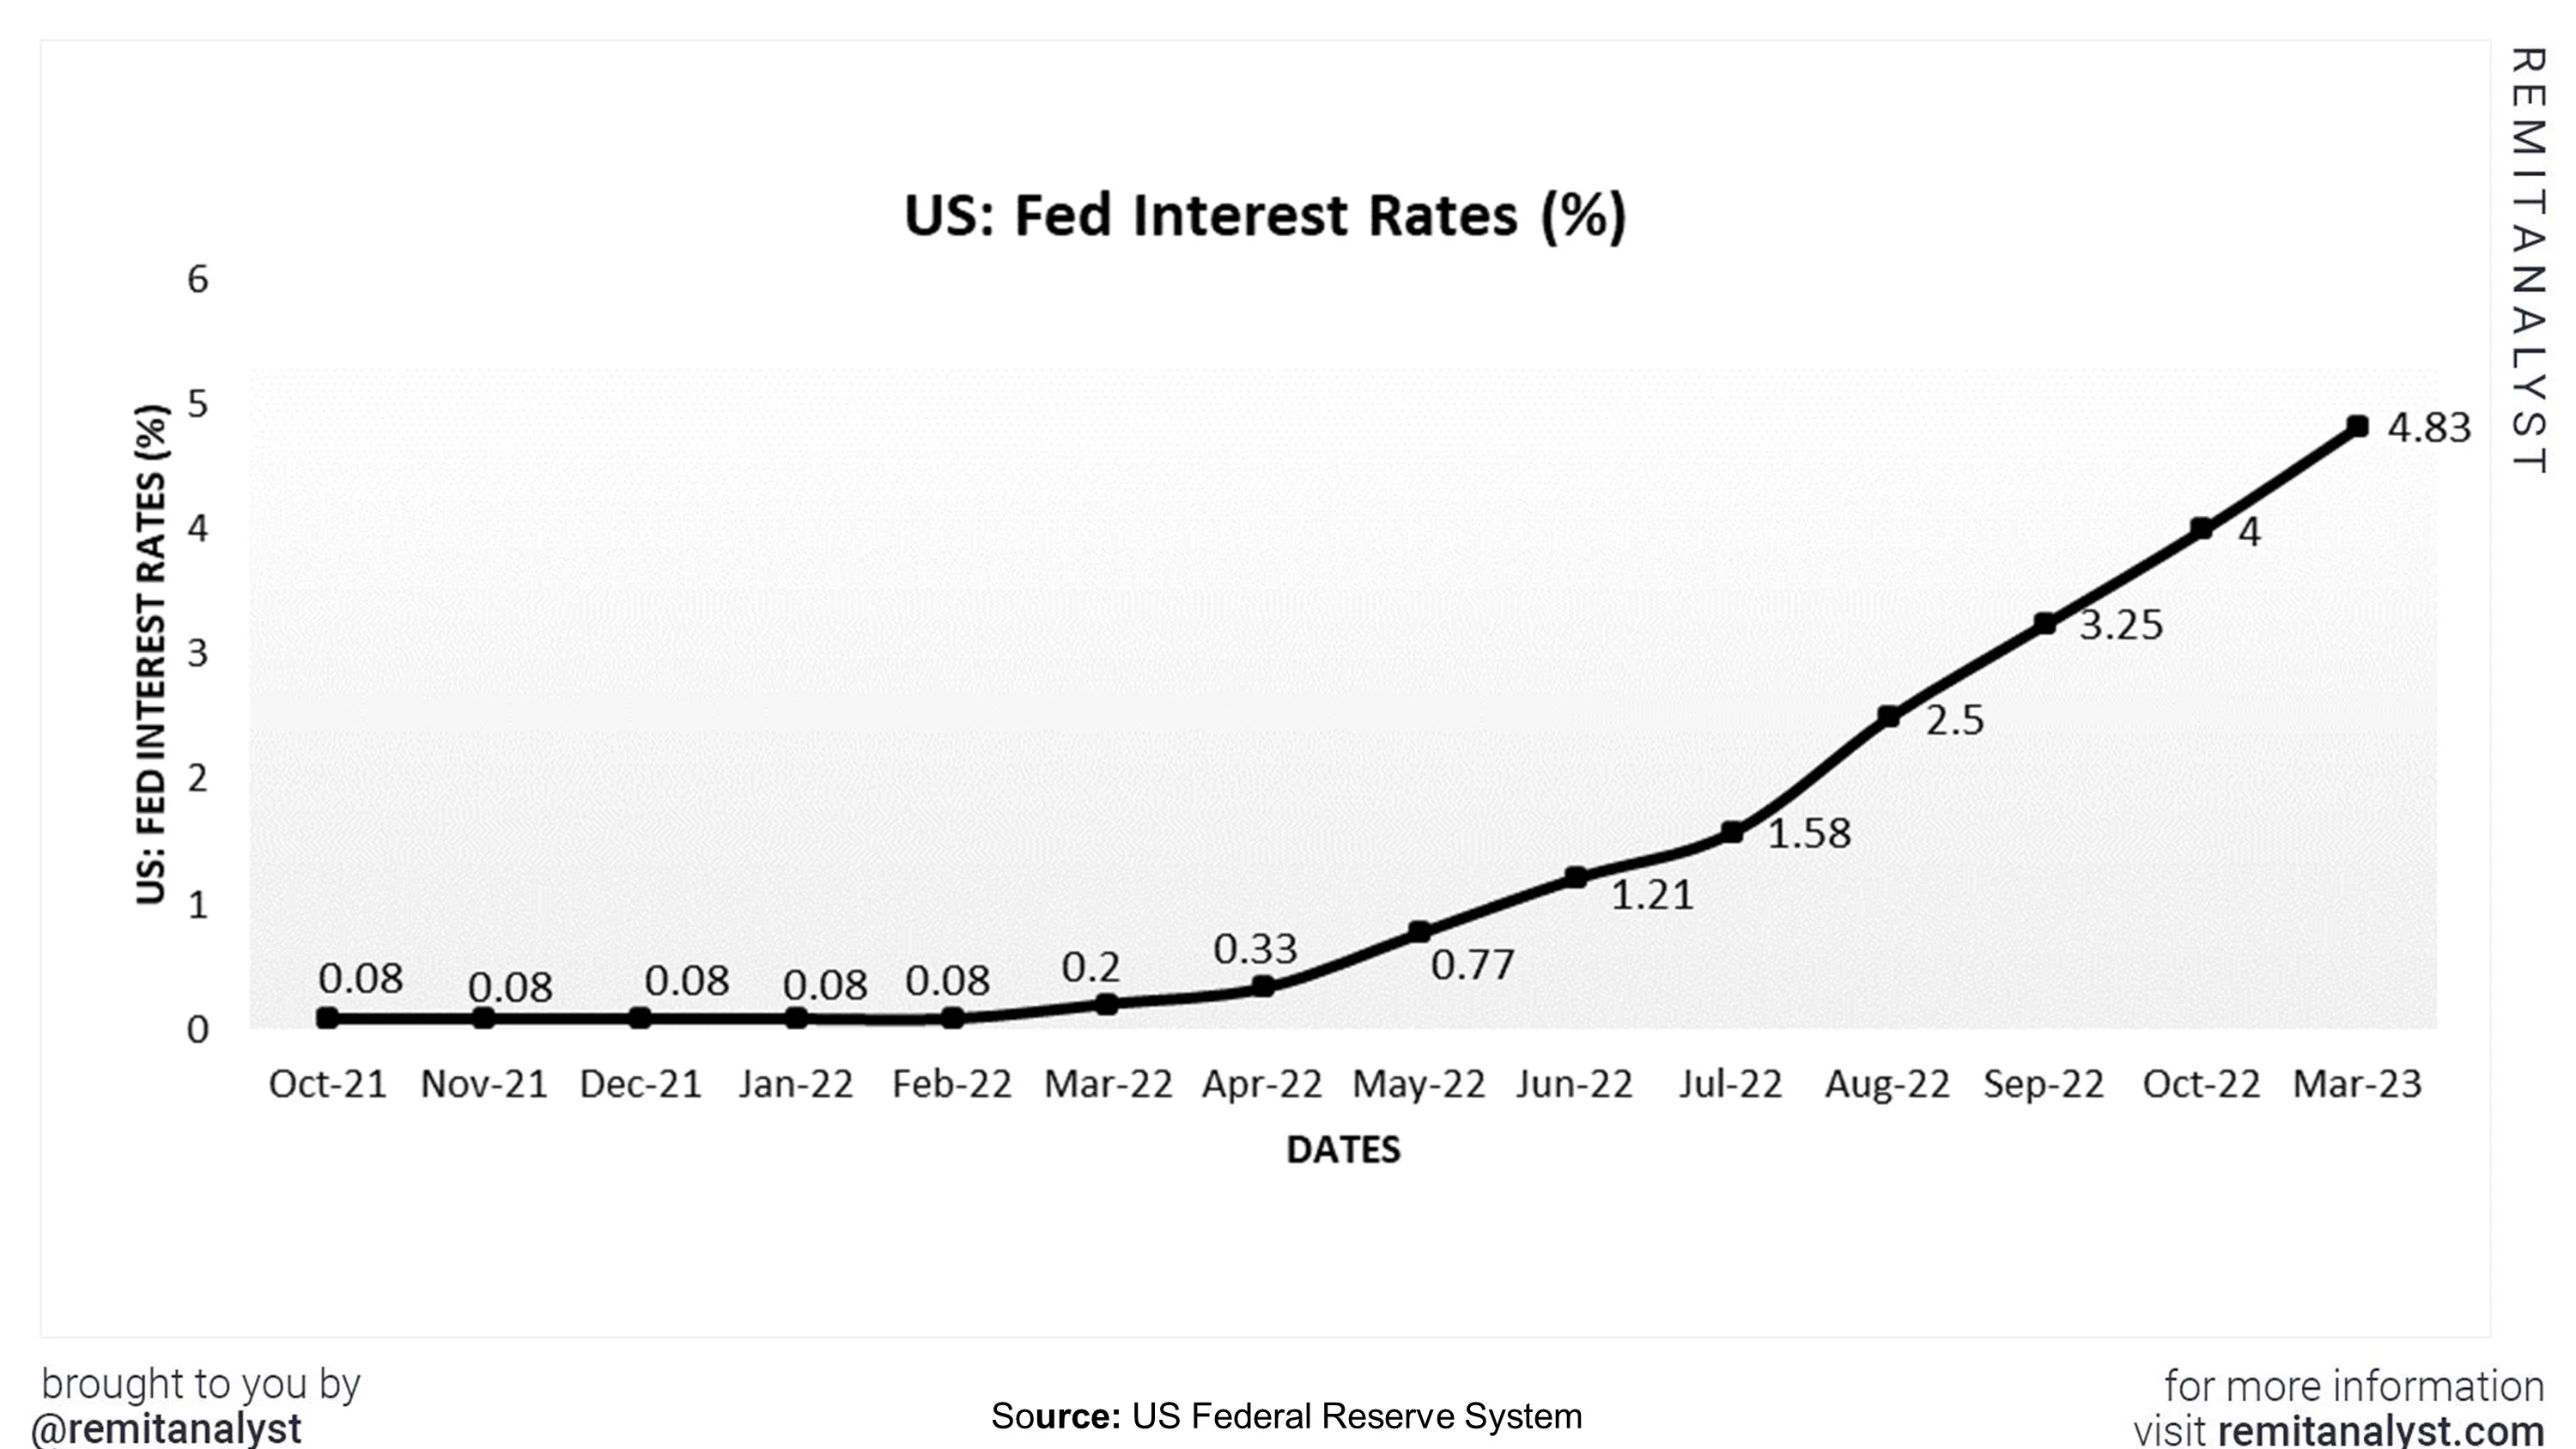 interest-rates-in-us-from-oct-2021-to-mar-2023